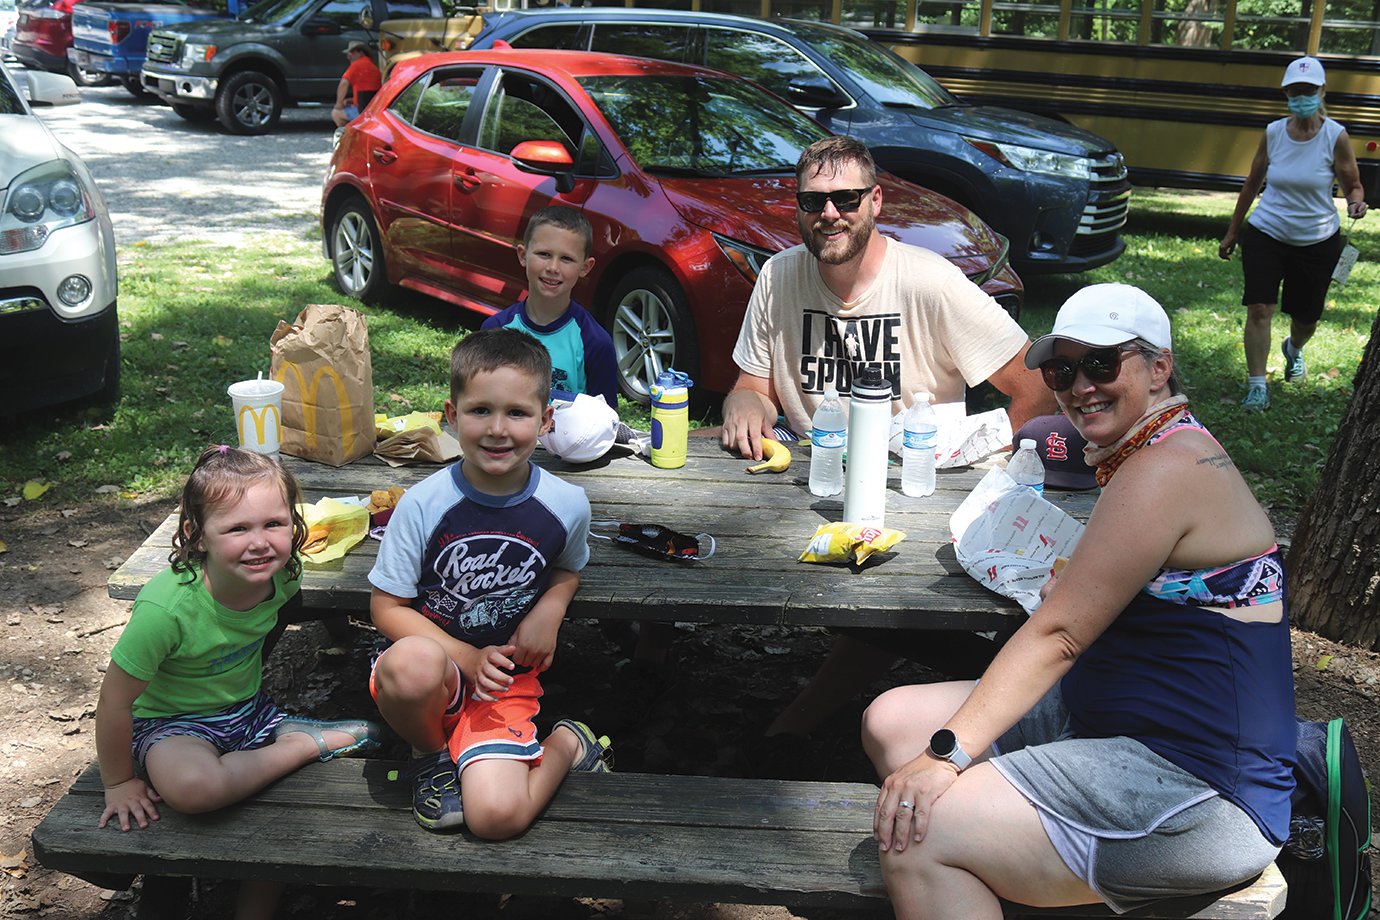 The Devylder family of Westfield enjoy lunch after joining the Friends of Sugar Creek “Kids Canoes and Crinoids” event Saturday. They include, from left, Greer, Maverick, Jameson, Josh and Summer.